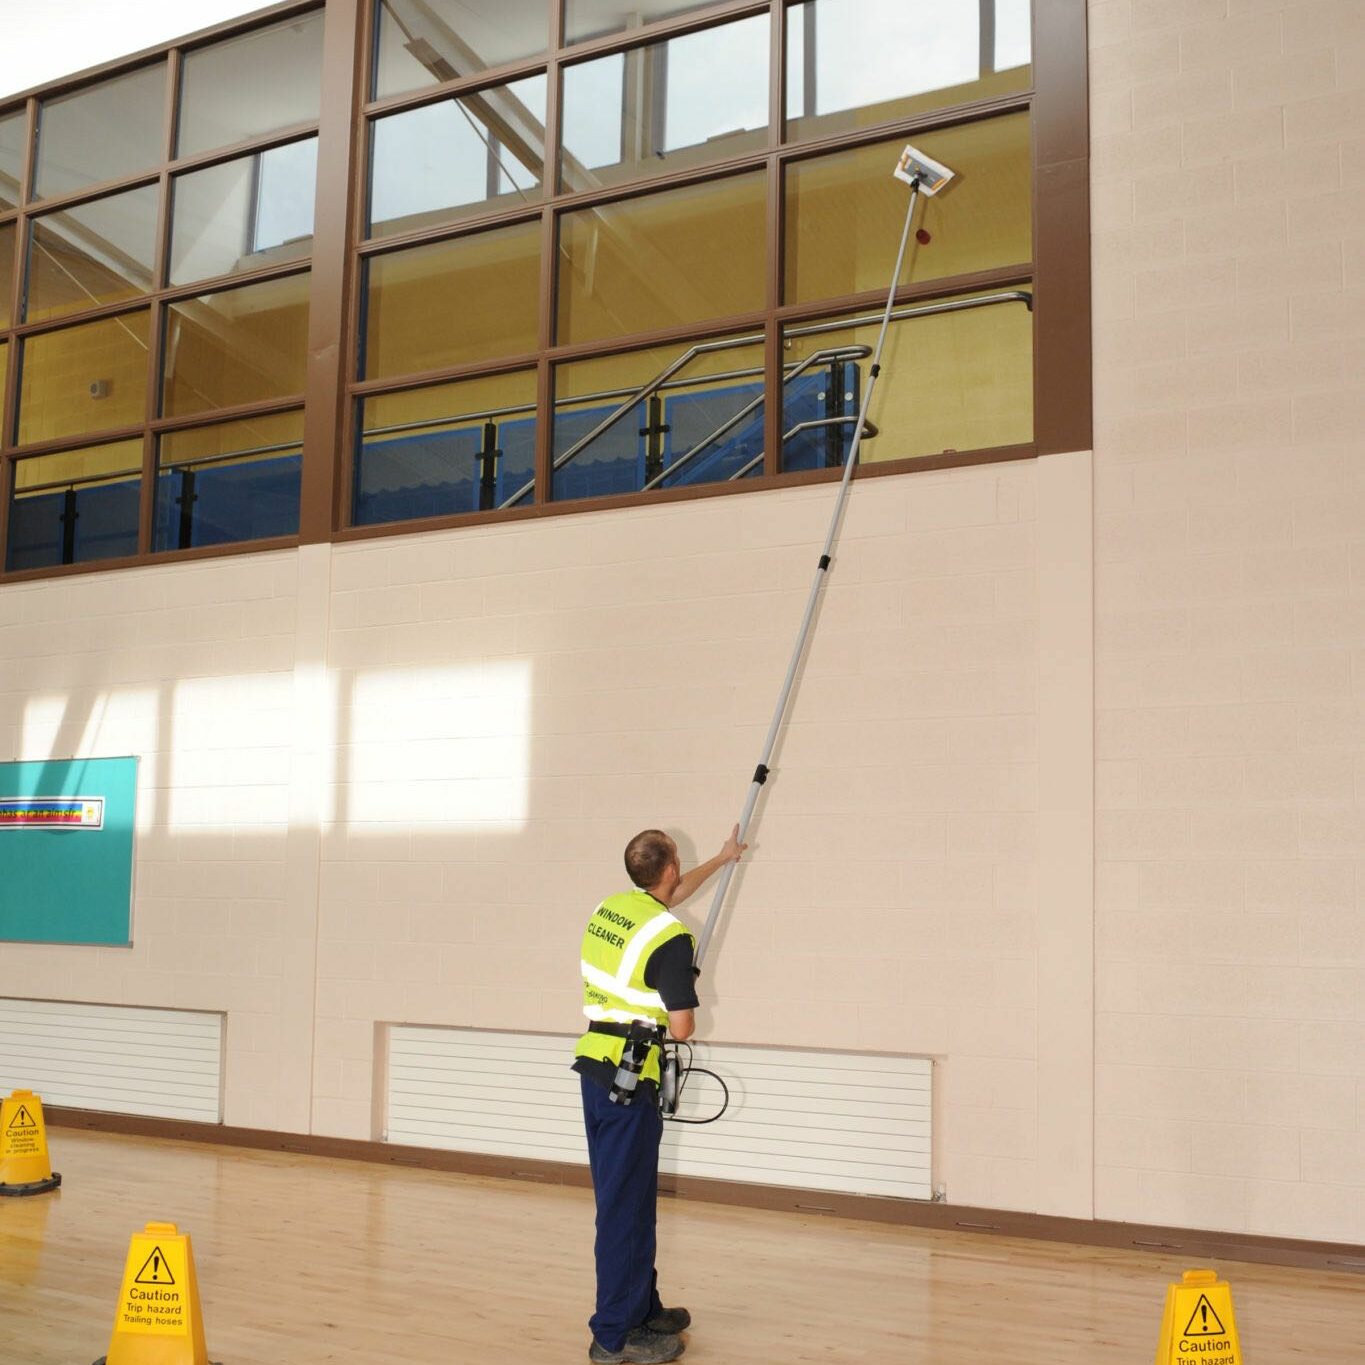 Interior window cleaning using our clever pole system